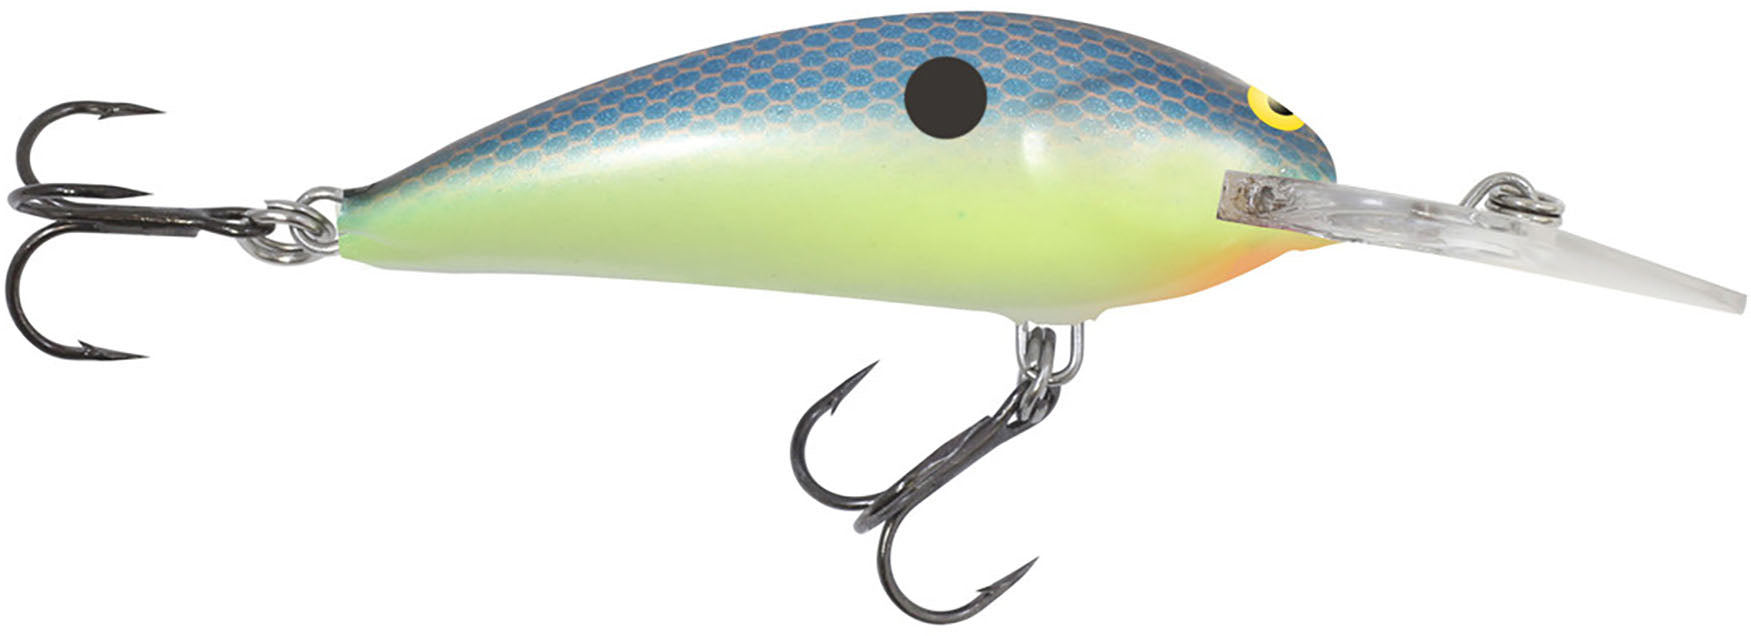 Northland Tackle Rumble Shad - 7 - Blue Chartreuse Shad